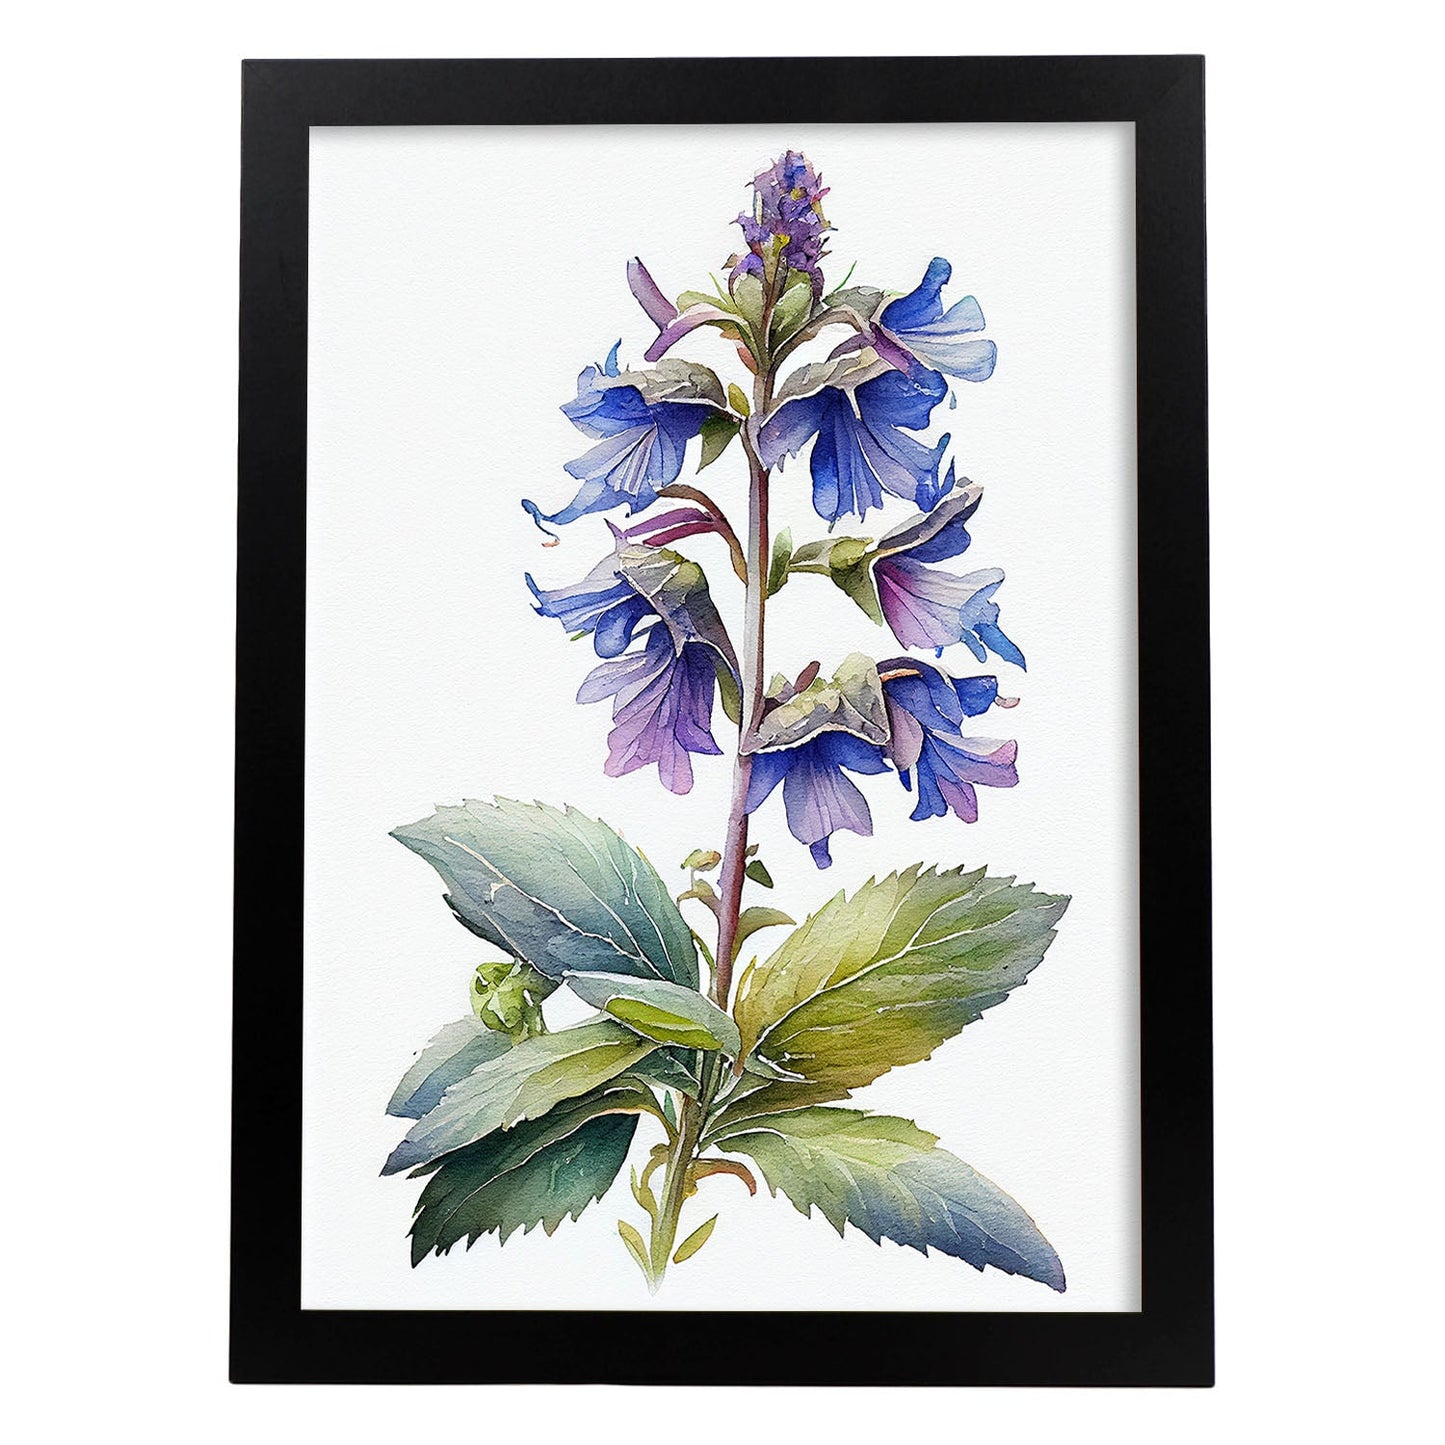 Nacnic watercolor minmal Borage_1. Aesthetic Wall Art Prints for Bedroom or Living Room Design.